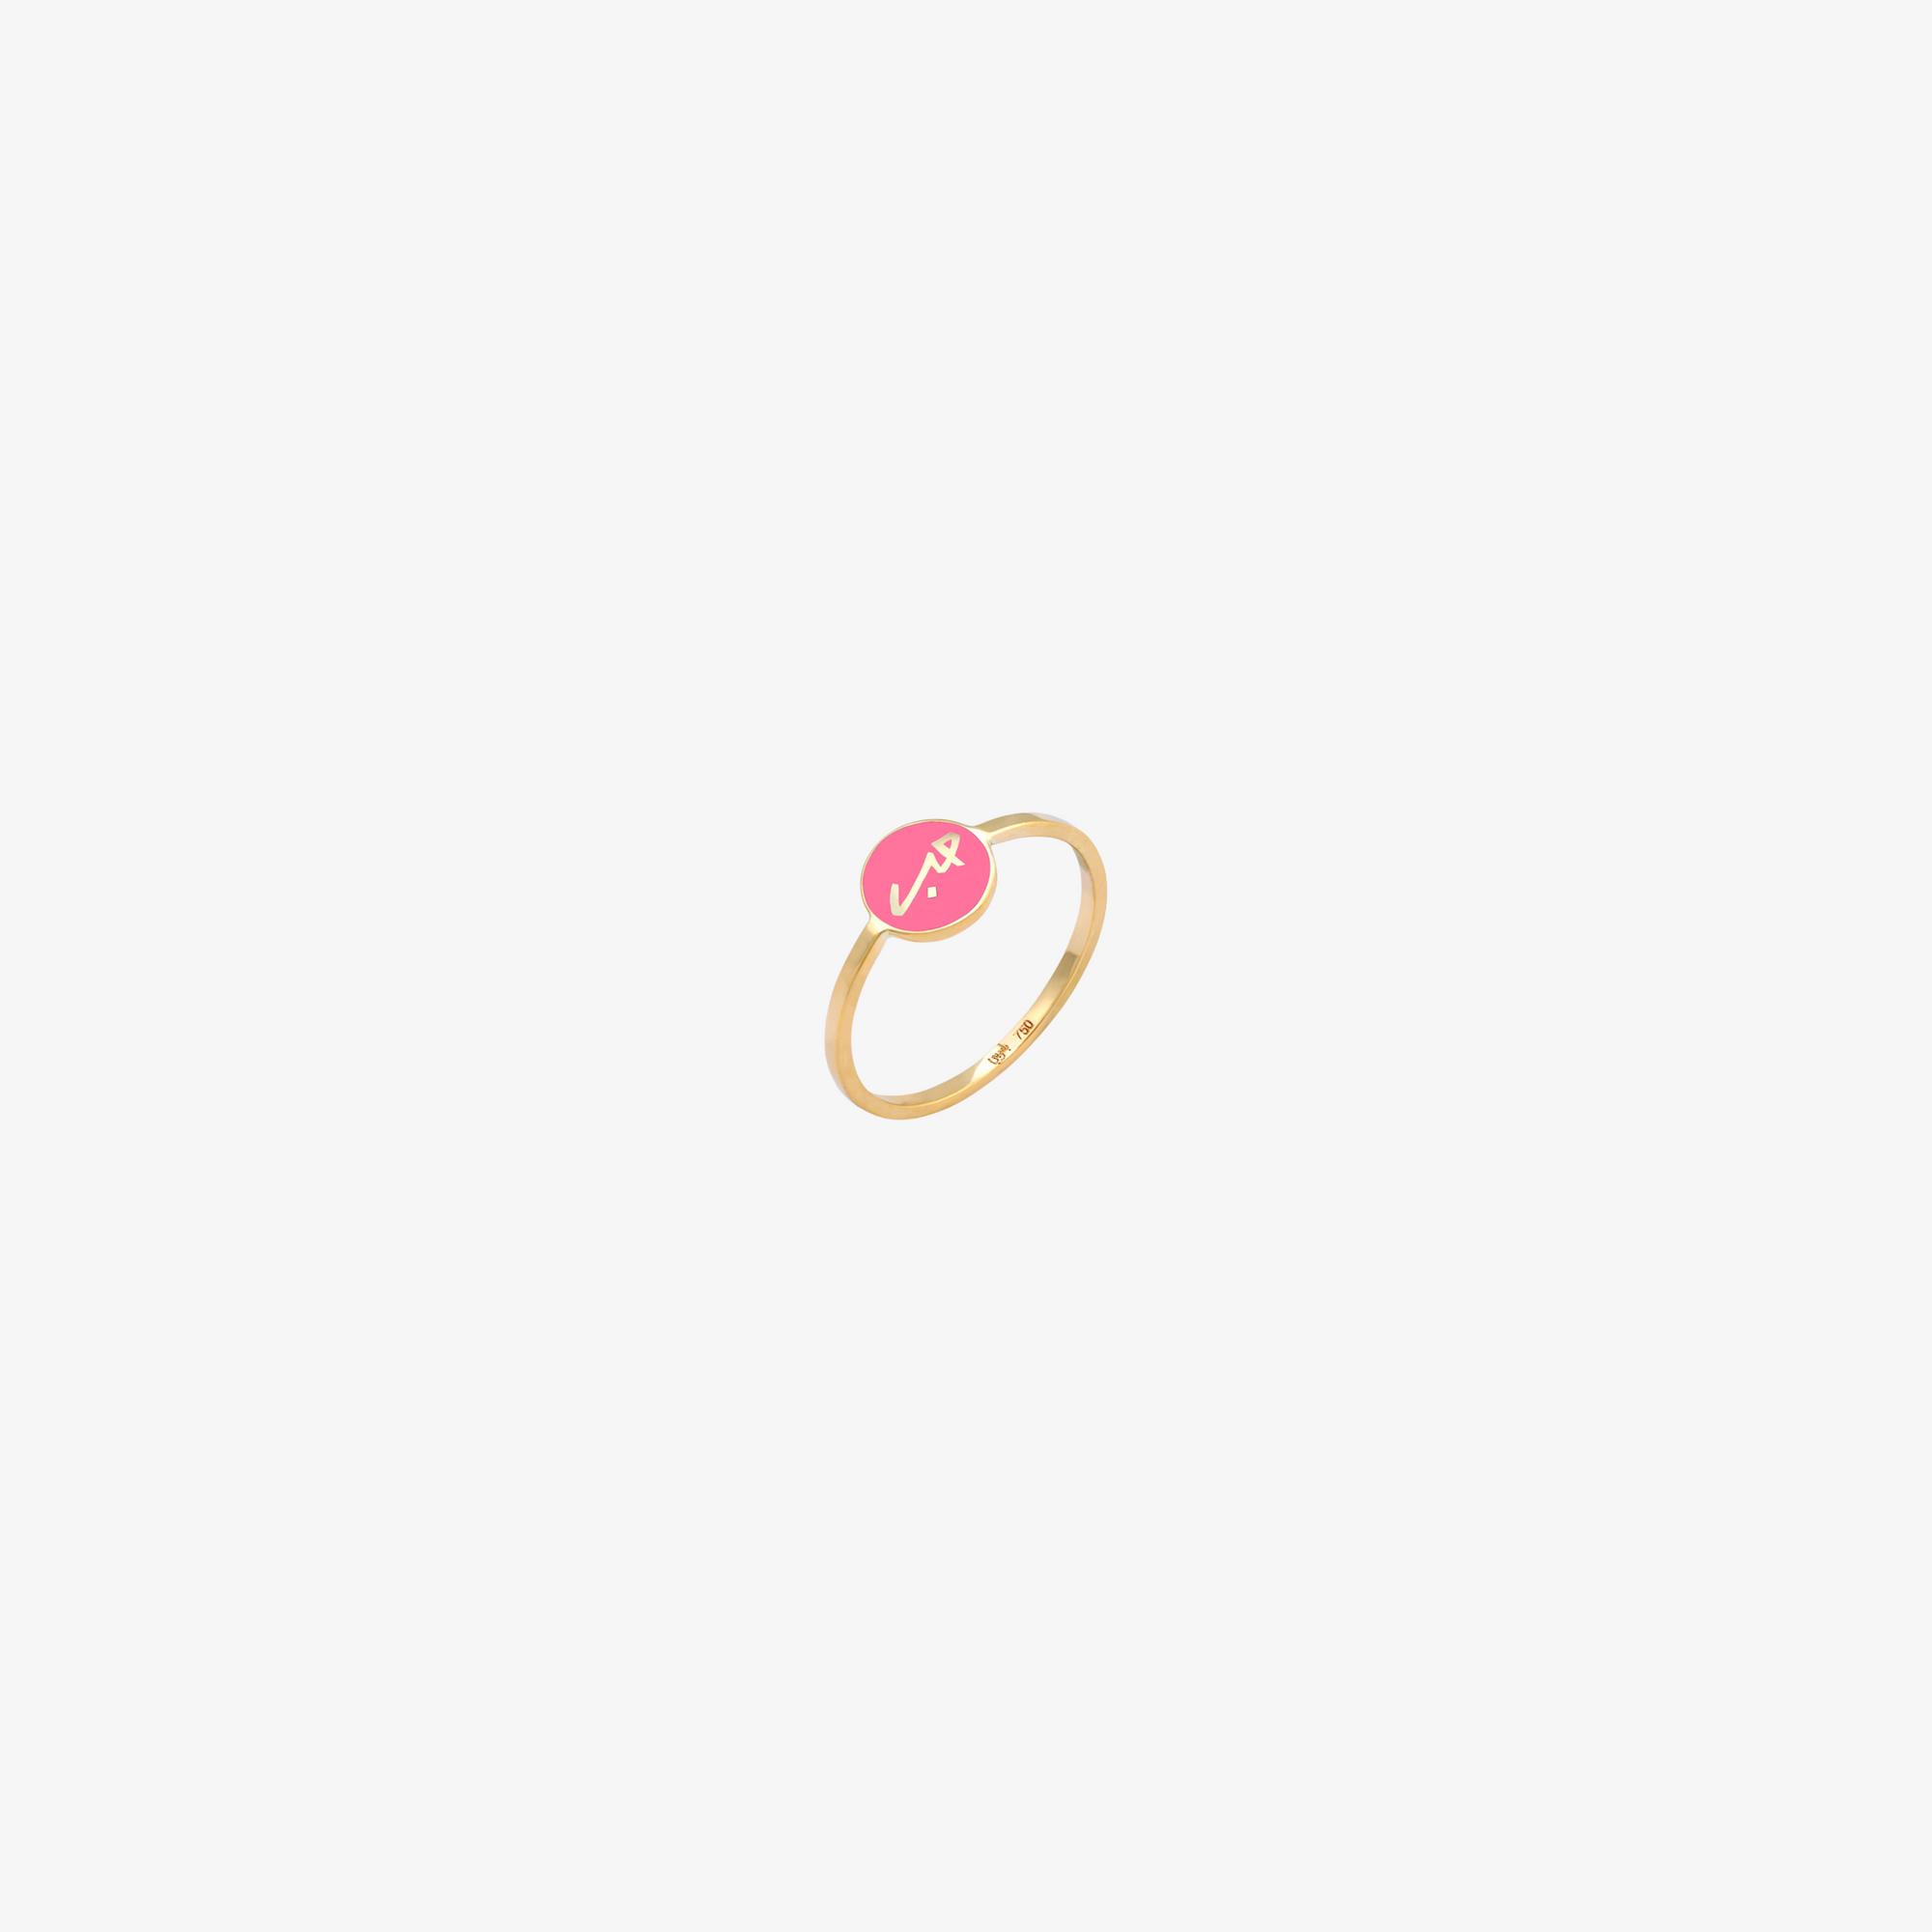 OULA  — Gold & Enamel Coin Shaped "Love" Ring